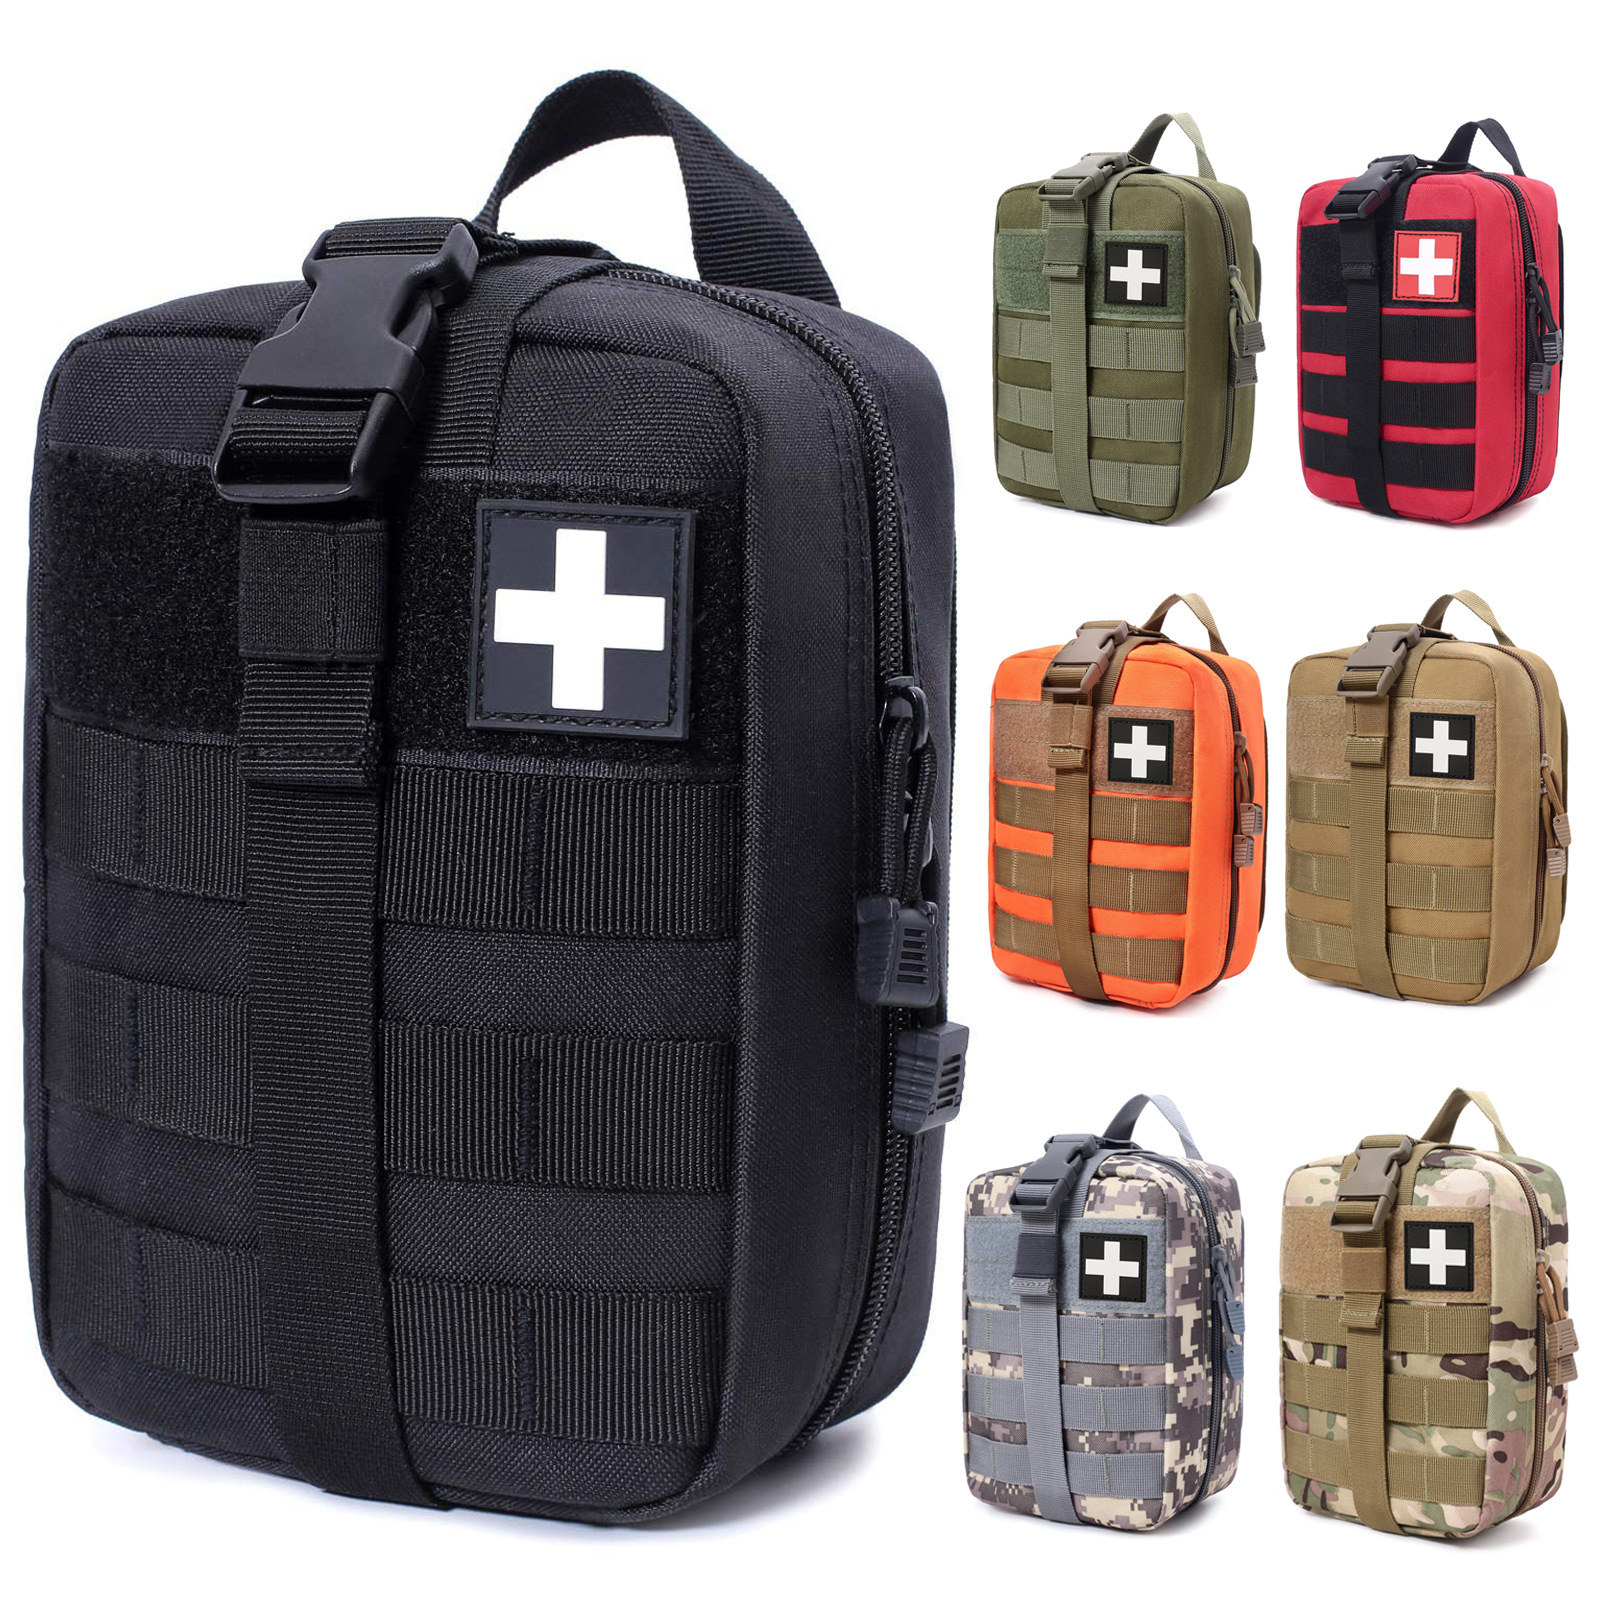 Kits de premiers soins tactiques Sac m￩dical Emergency Outdoor Army Hunting Car Emergency Camping Survival Tool Military Edc Pouche